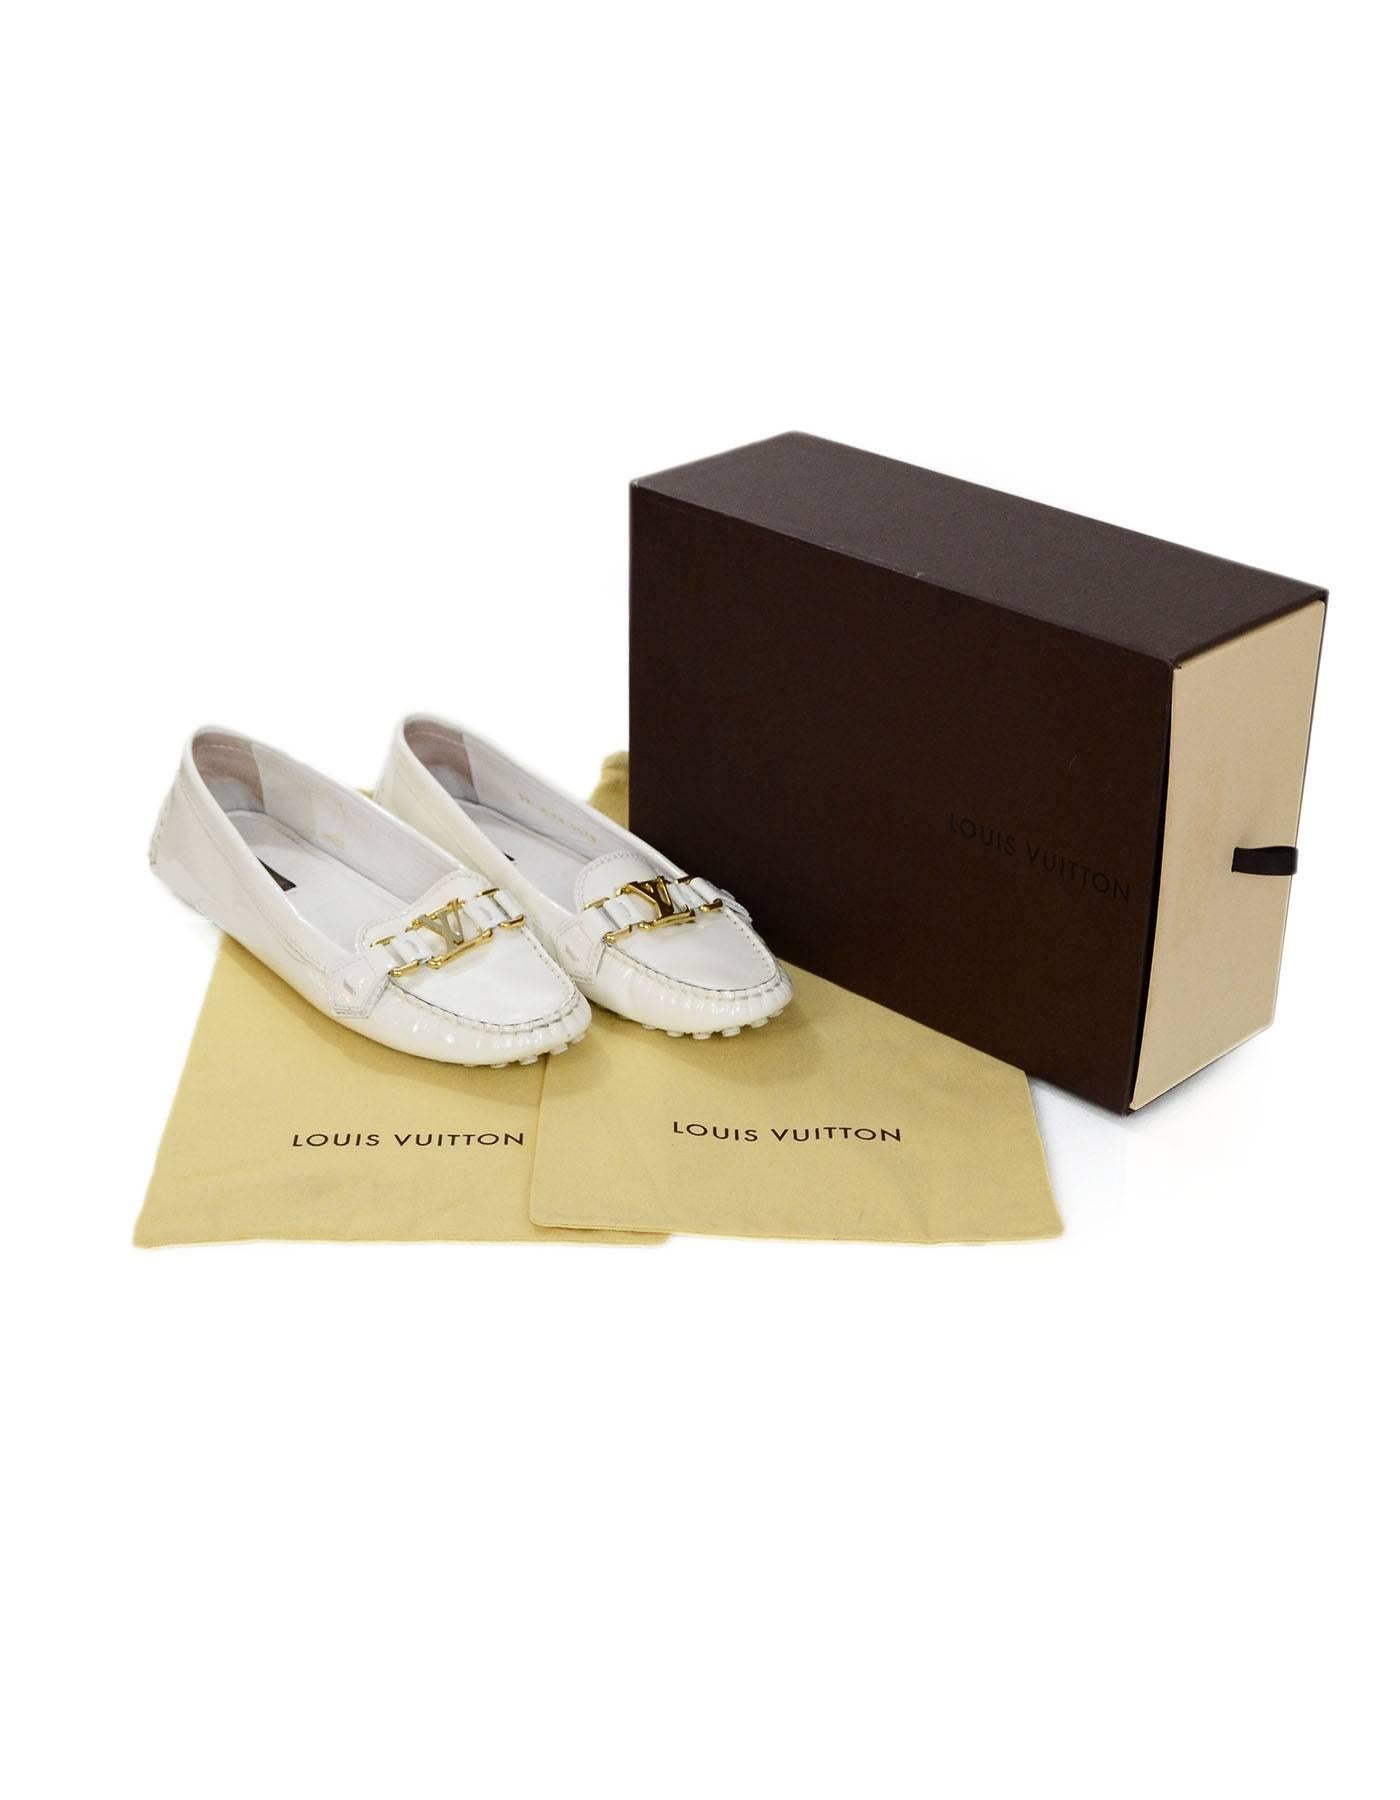 Louis Vuitton White Patent LV Driving Loafers Sz 39 with Box, DB 2